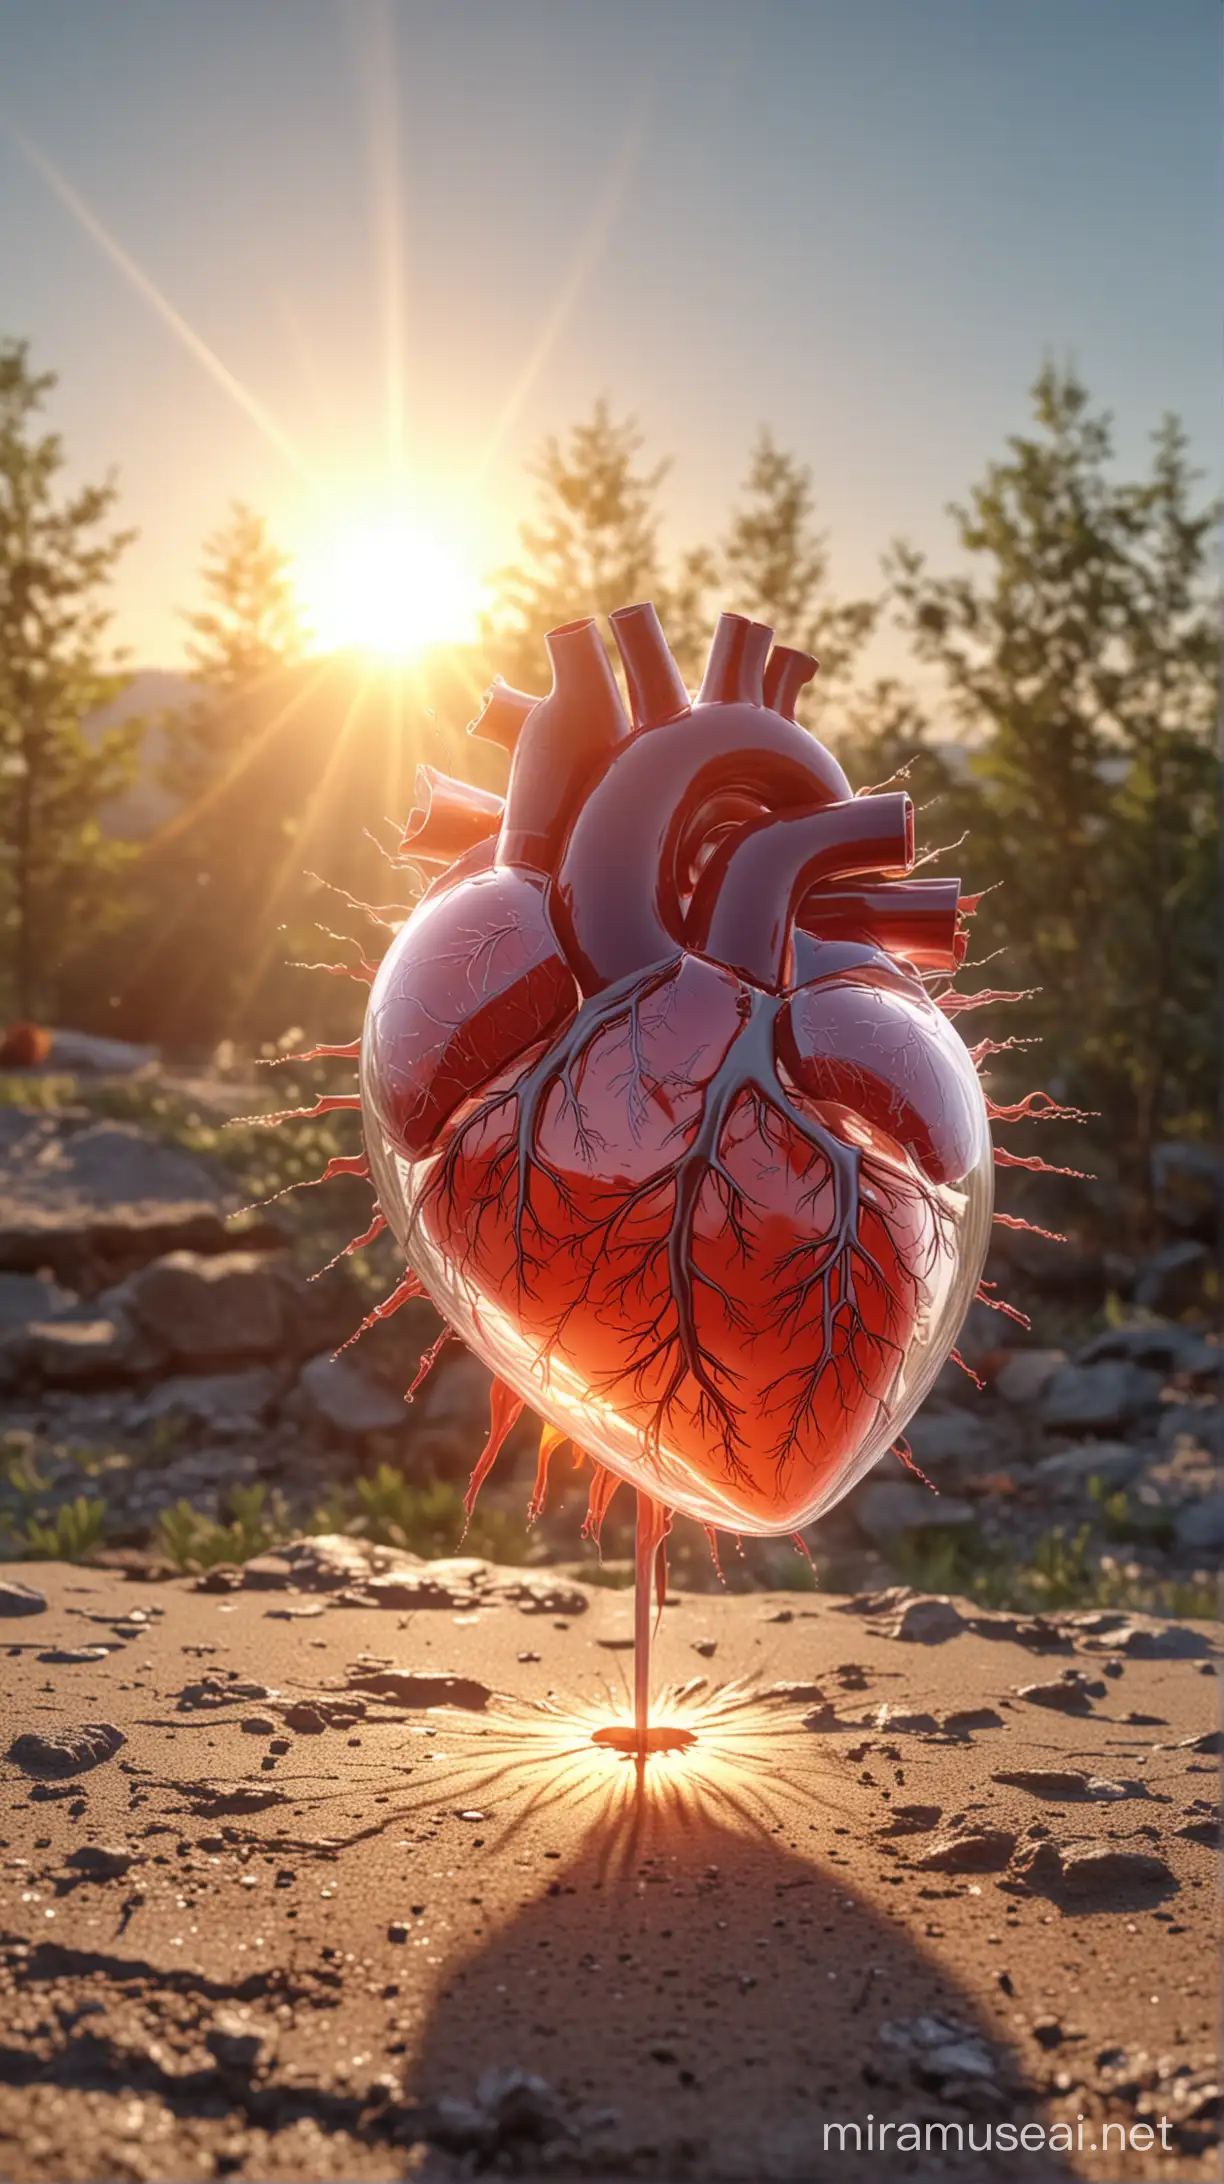 Detailed Heart Diagram with Natural Background in 4K HDR under Sunlight